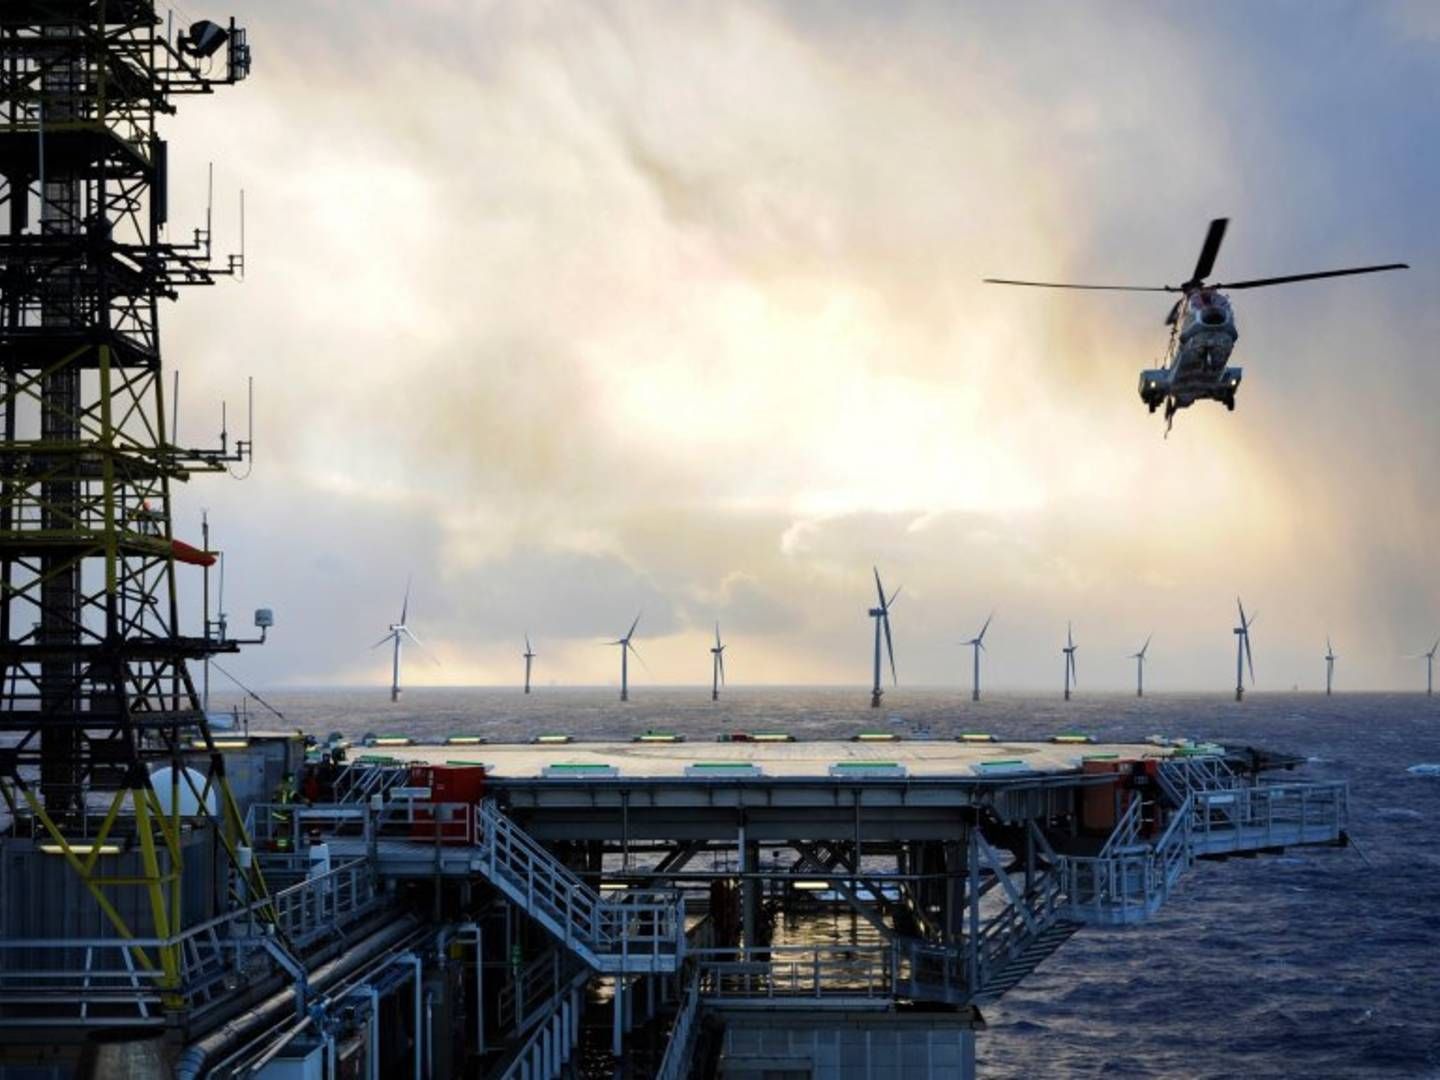 Another NOK 2 billion have been proposed for state energy fund Enova, which last year supported Equinor's floating wind farm Hywind Tampen with NOK 2.3 billion. | Photo: Equinor